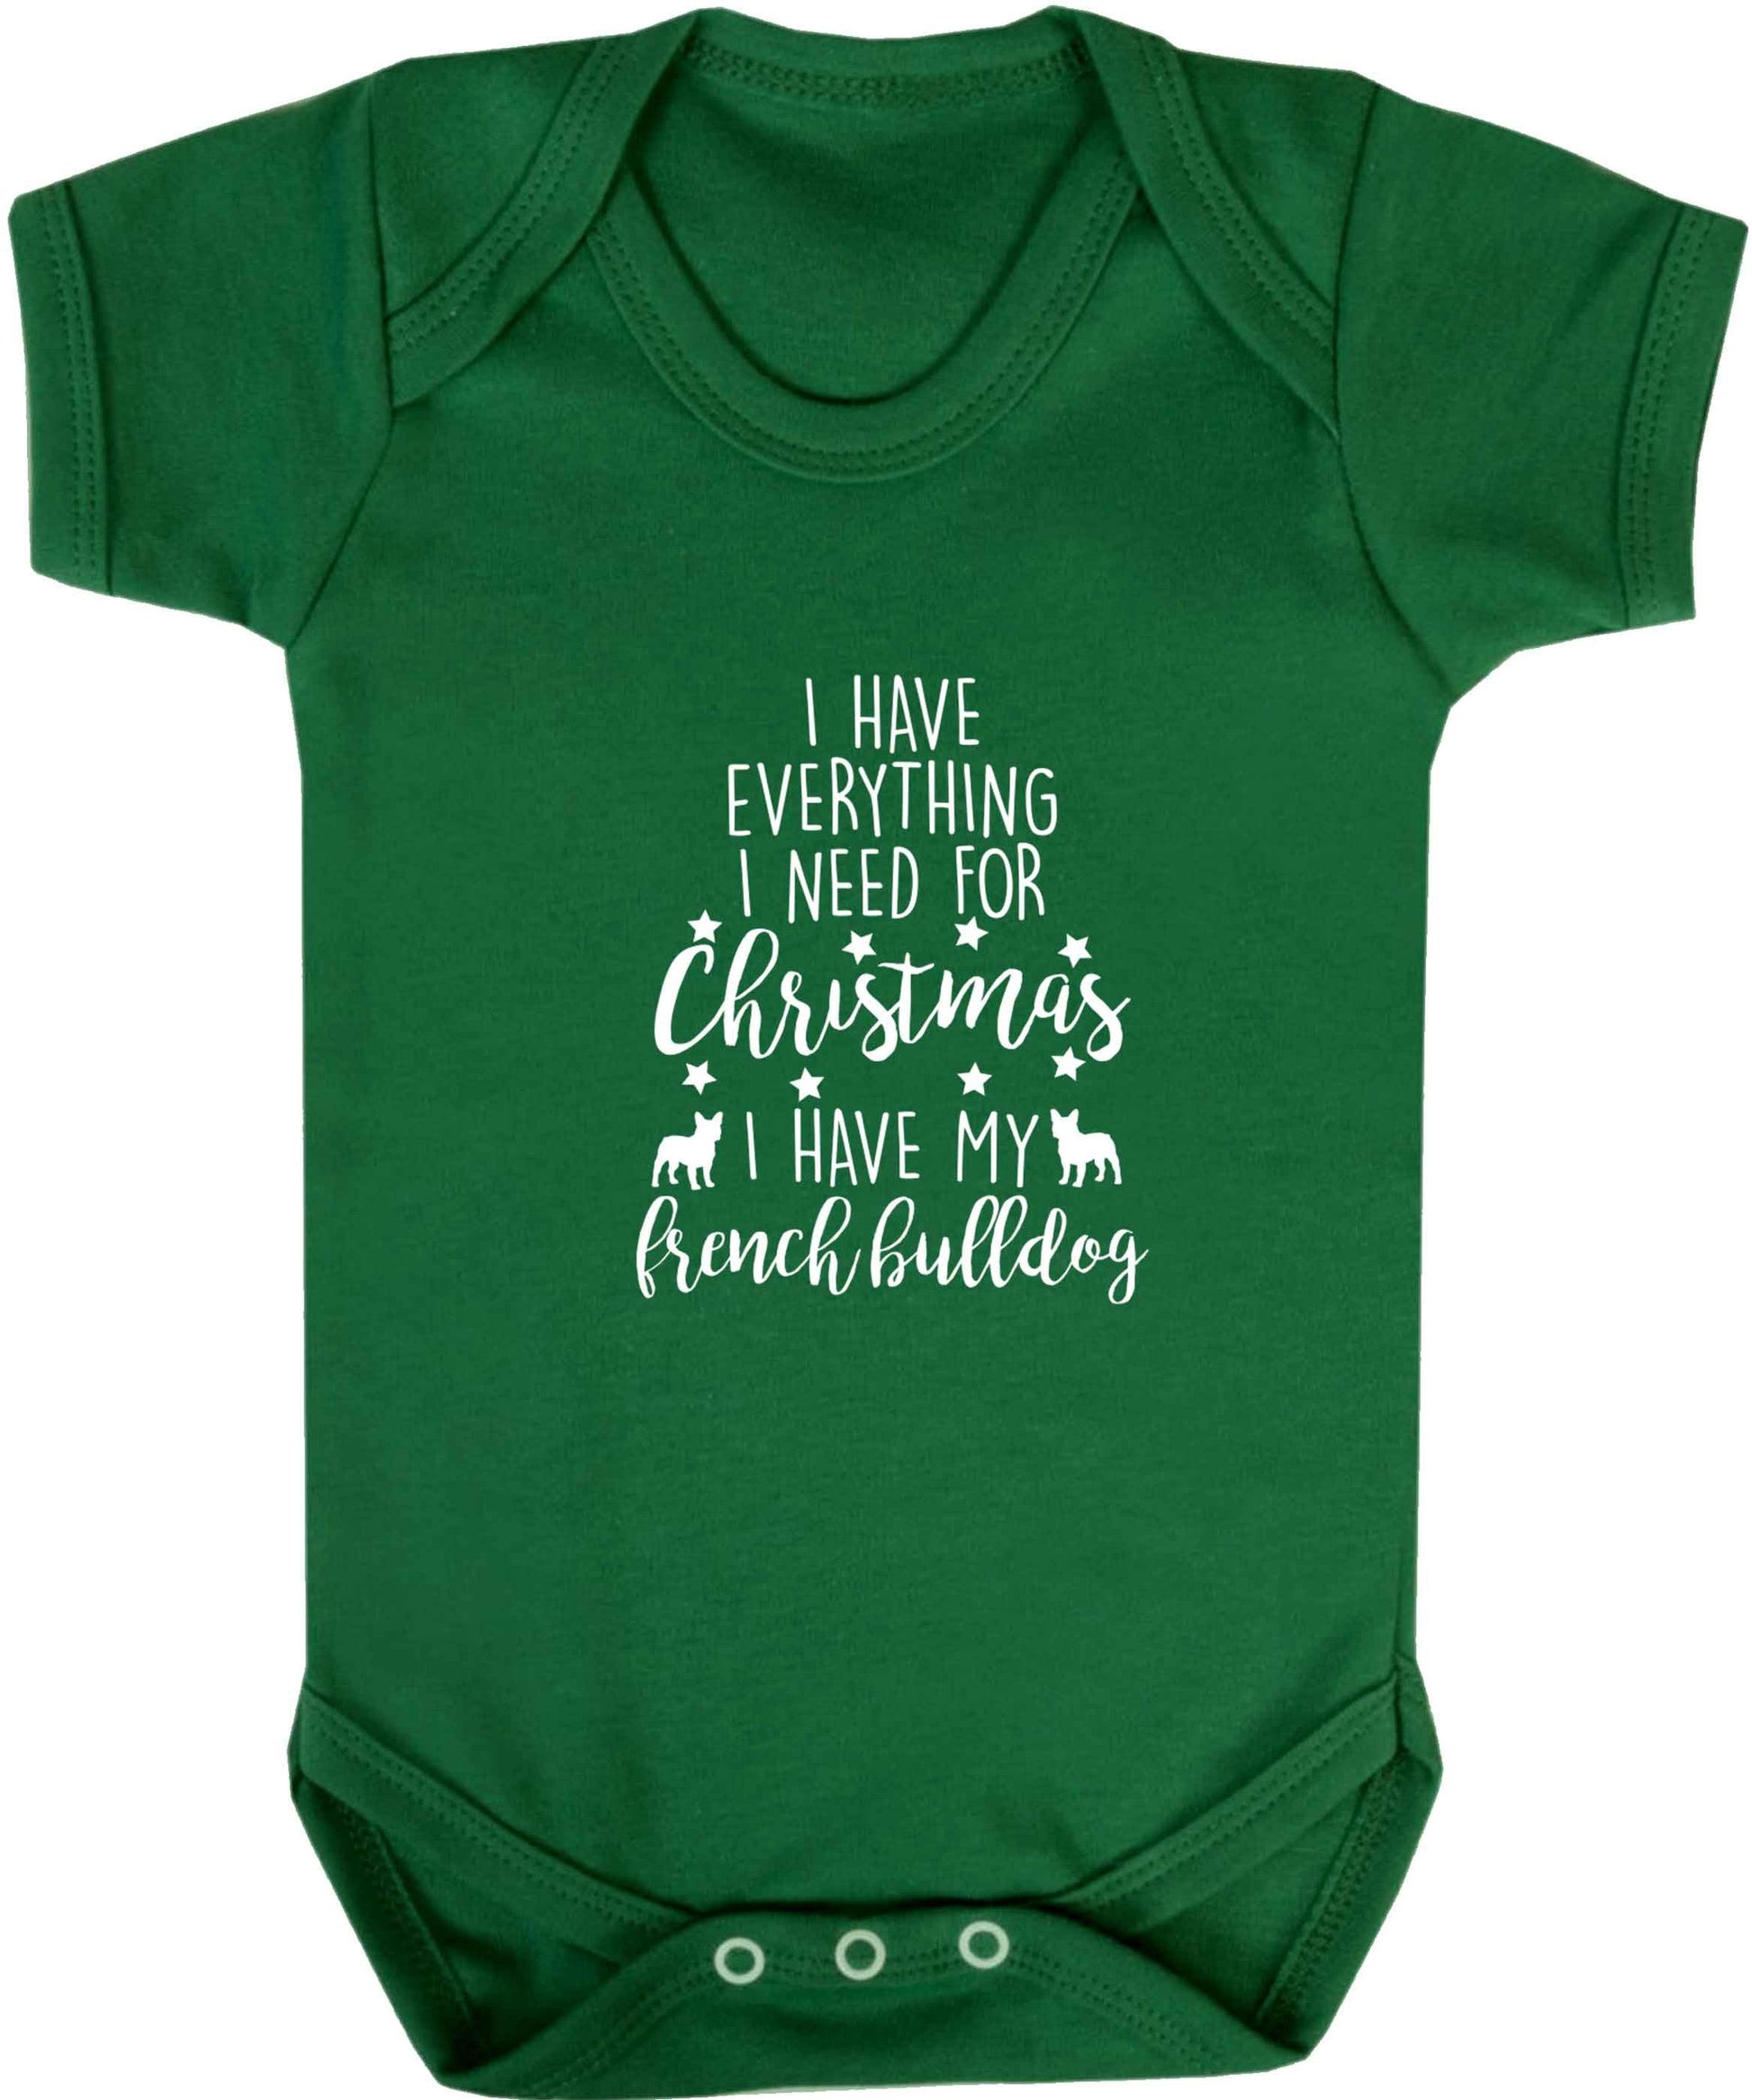 I have everything I need for Christmas I have my french bulldog baby vest green 18-24 months